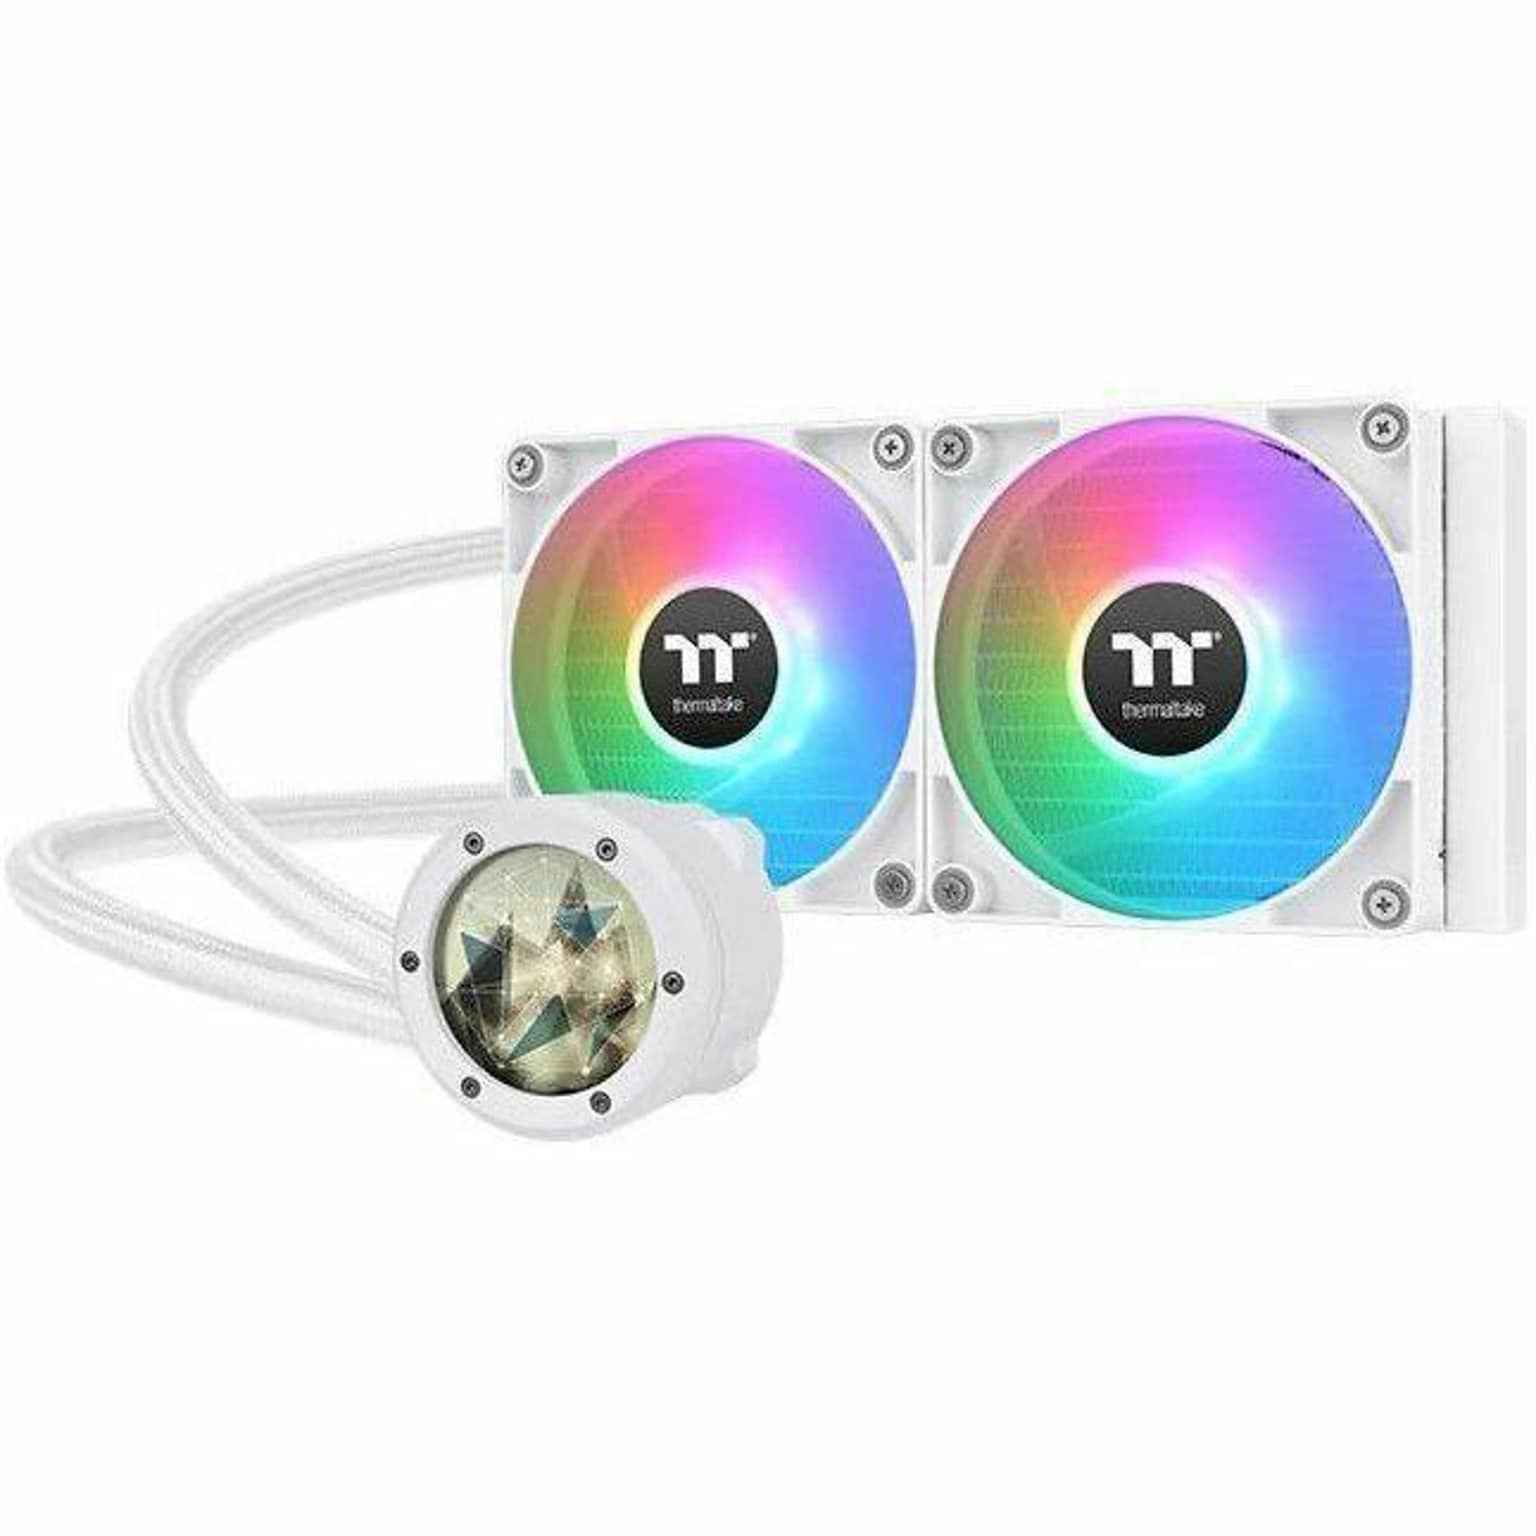 Thermaltake TH240 V2 Ultra ARGB Sync 120mm Cooling Fan/Radiator/Water Block/Pump with RGB Lighting (CLW404PL12SWA)